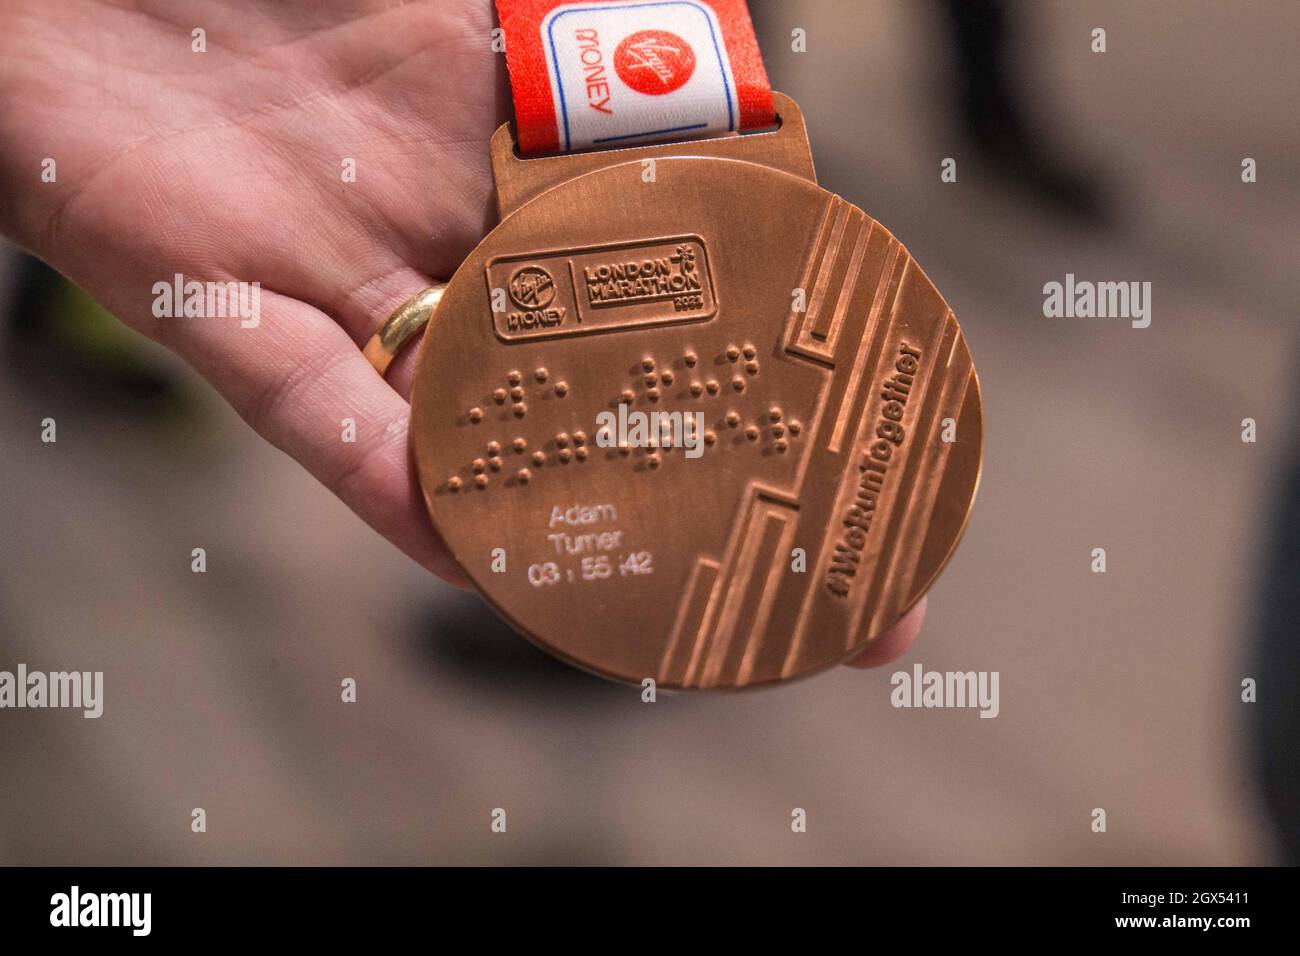 London UK 4 October 2021 Adam Turner showing his London Marathon winners  medal with his name engraved as well as time of 3:56:42 completion to the  race,Service been offered by New balance